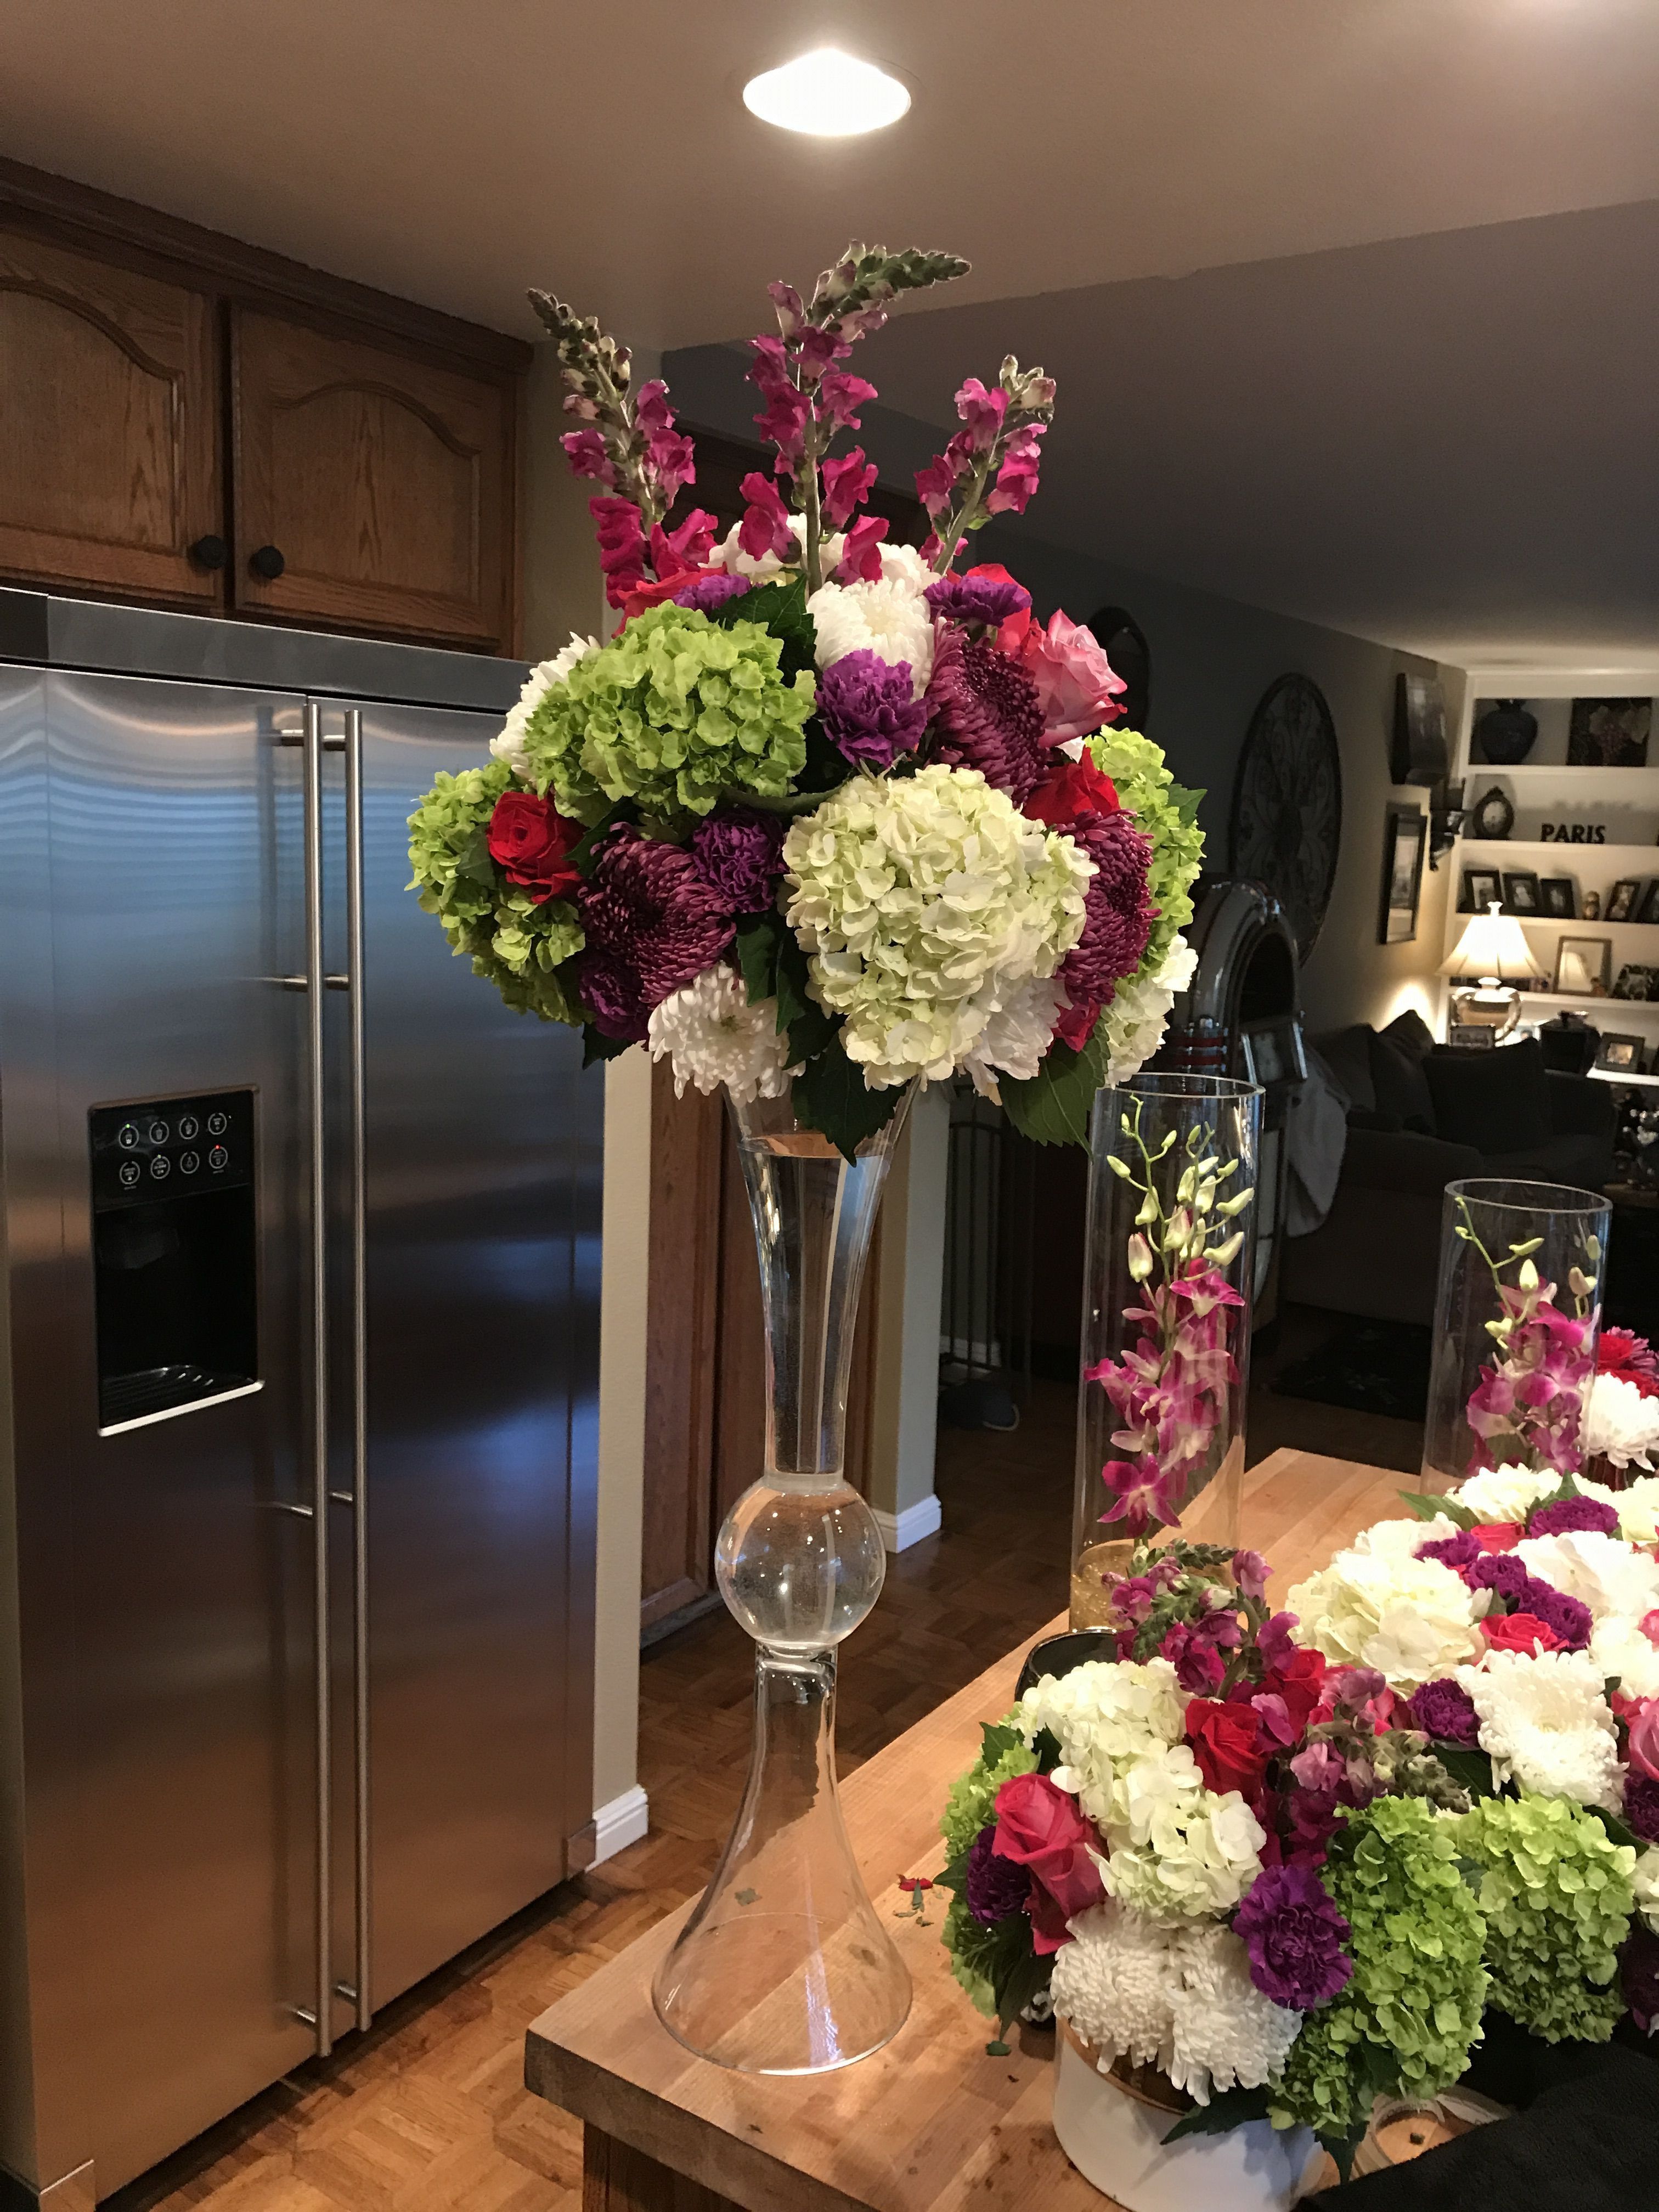 15 attractive Tall Trumpet Vases for Sale 2023 free download tall trumpet vases for sale of 24 tall vases for sale the weekly world for colorful tall centerpiece in trumpet vase